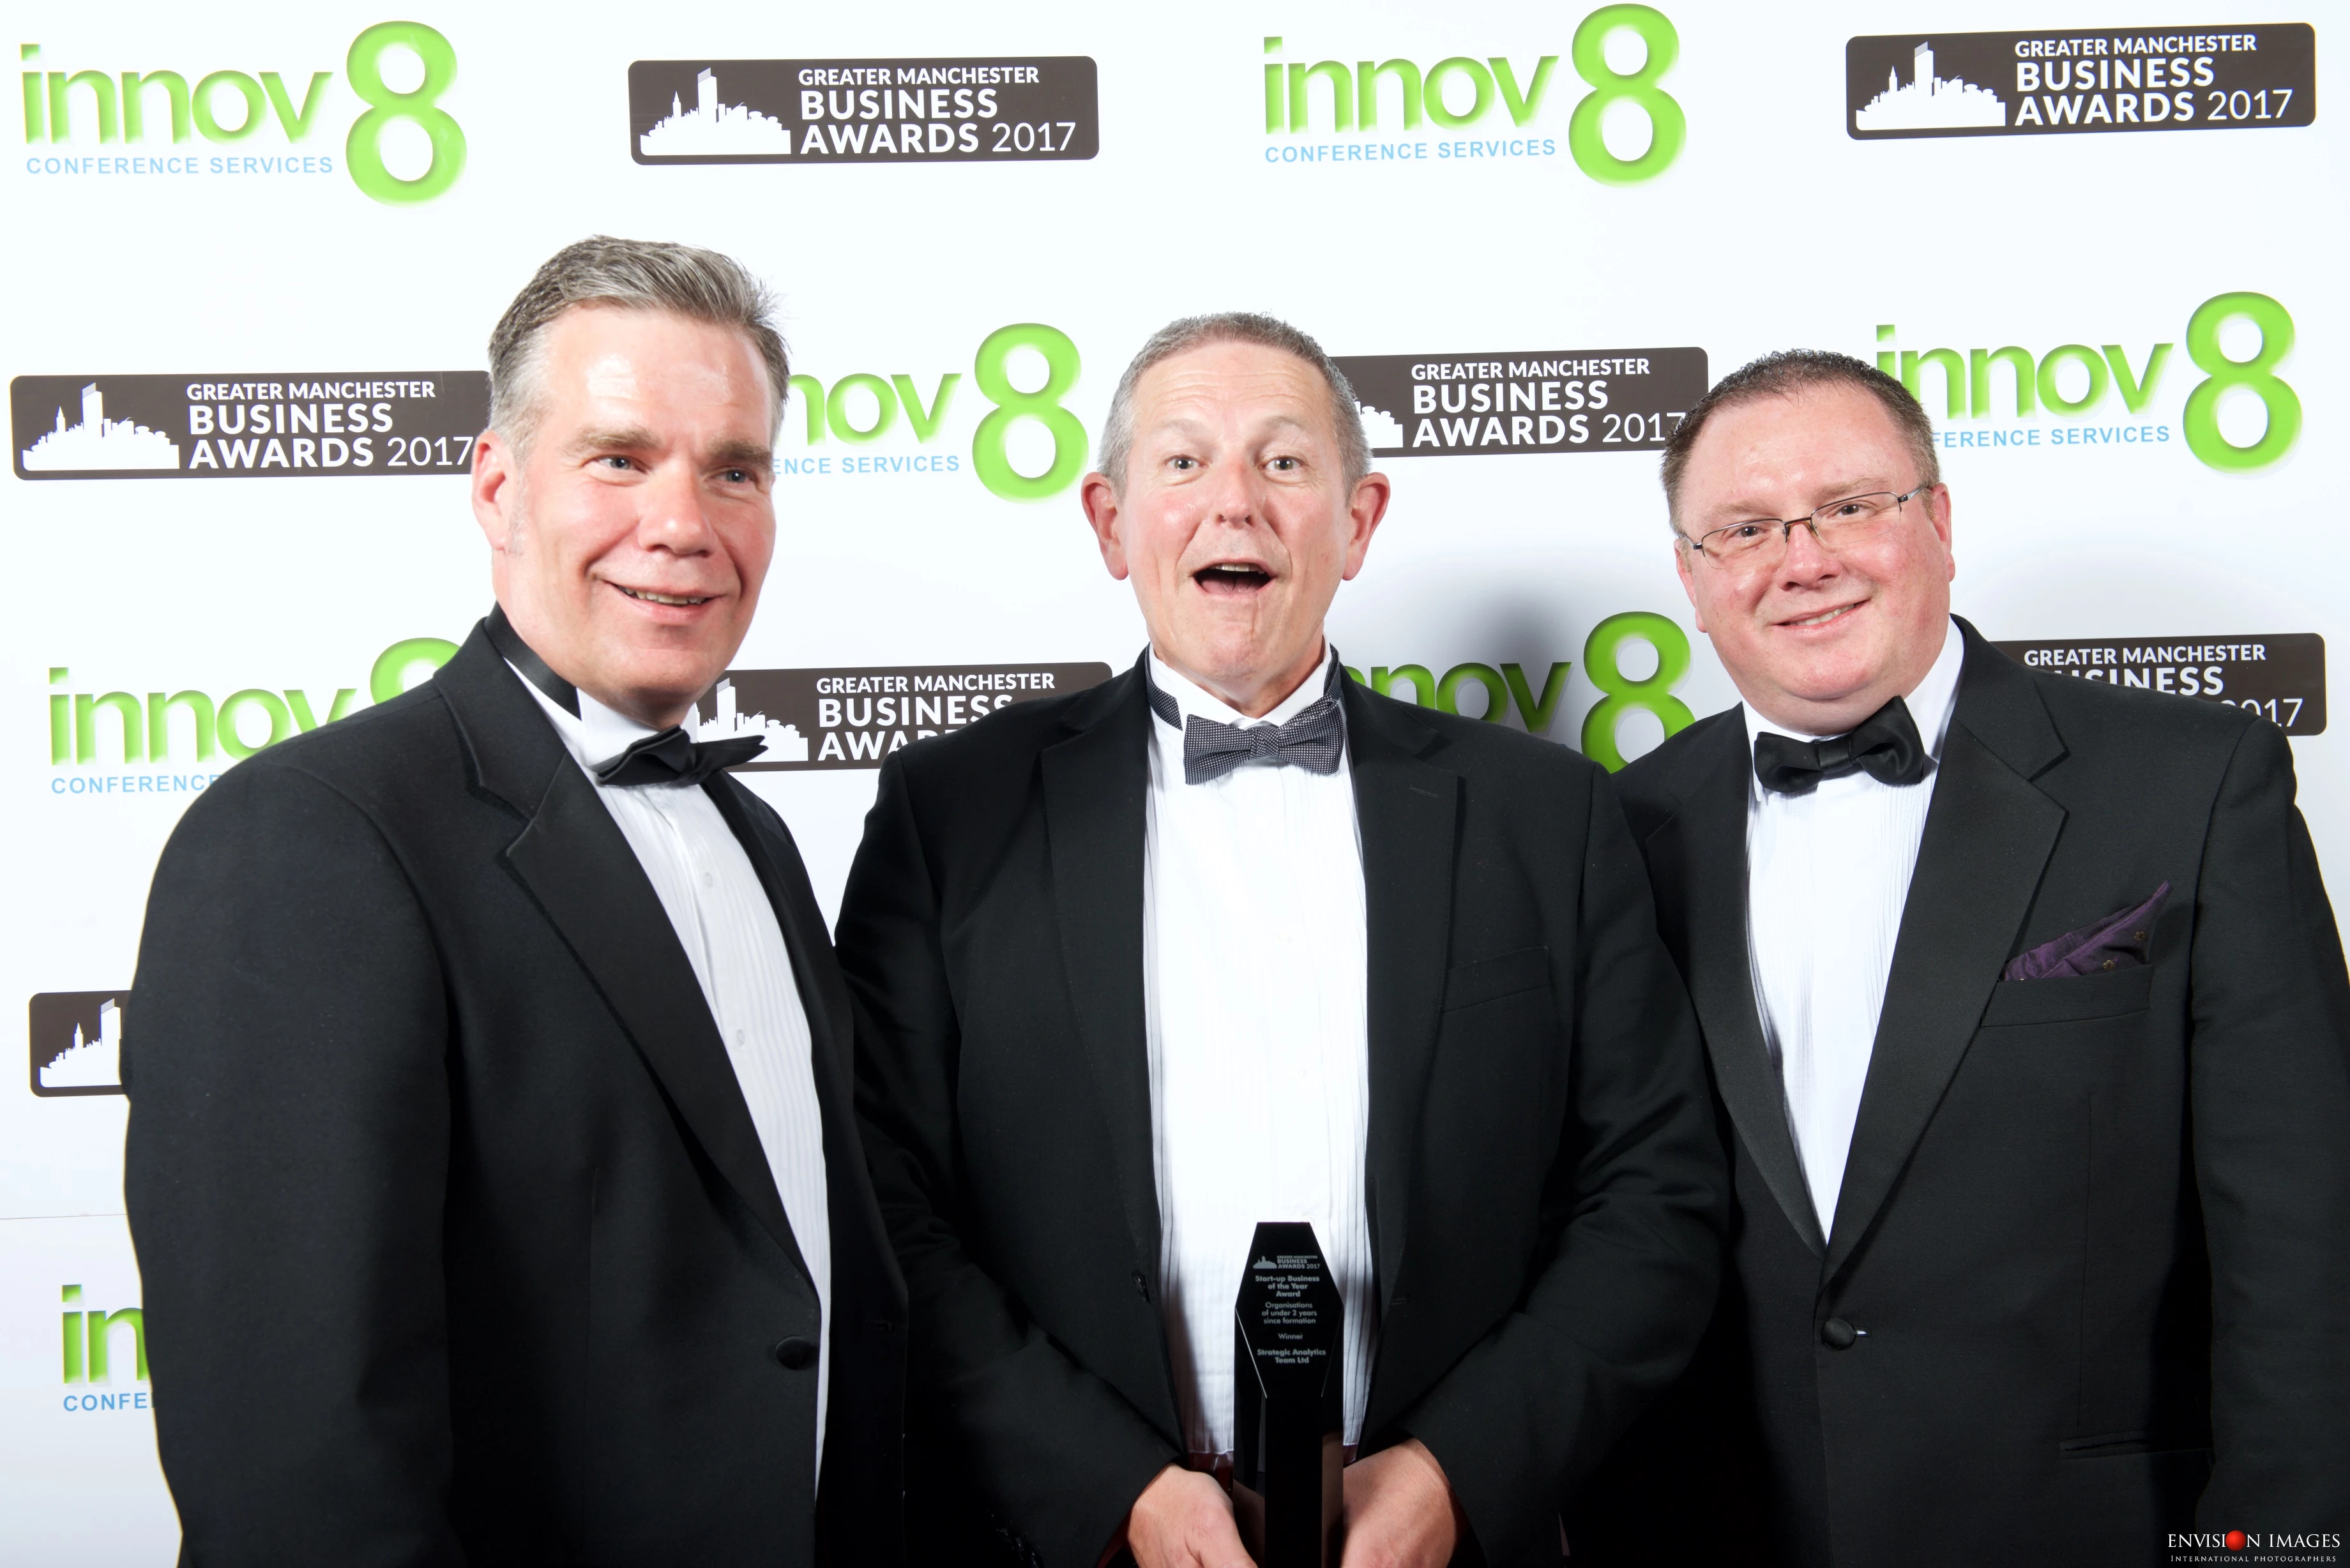 Paul Jorgensen (centre) collects the Greater Manchester Business Award for Start-up Business of the Year 2017 with his SAT colleagues.